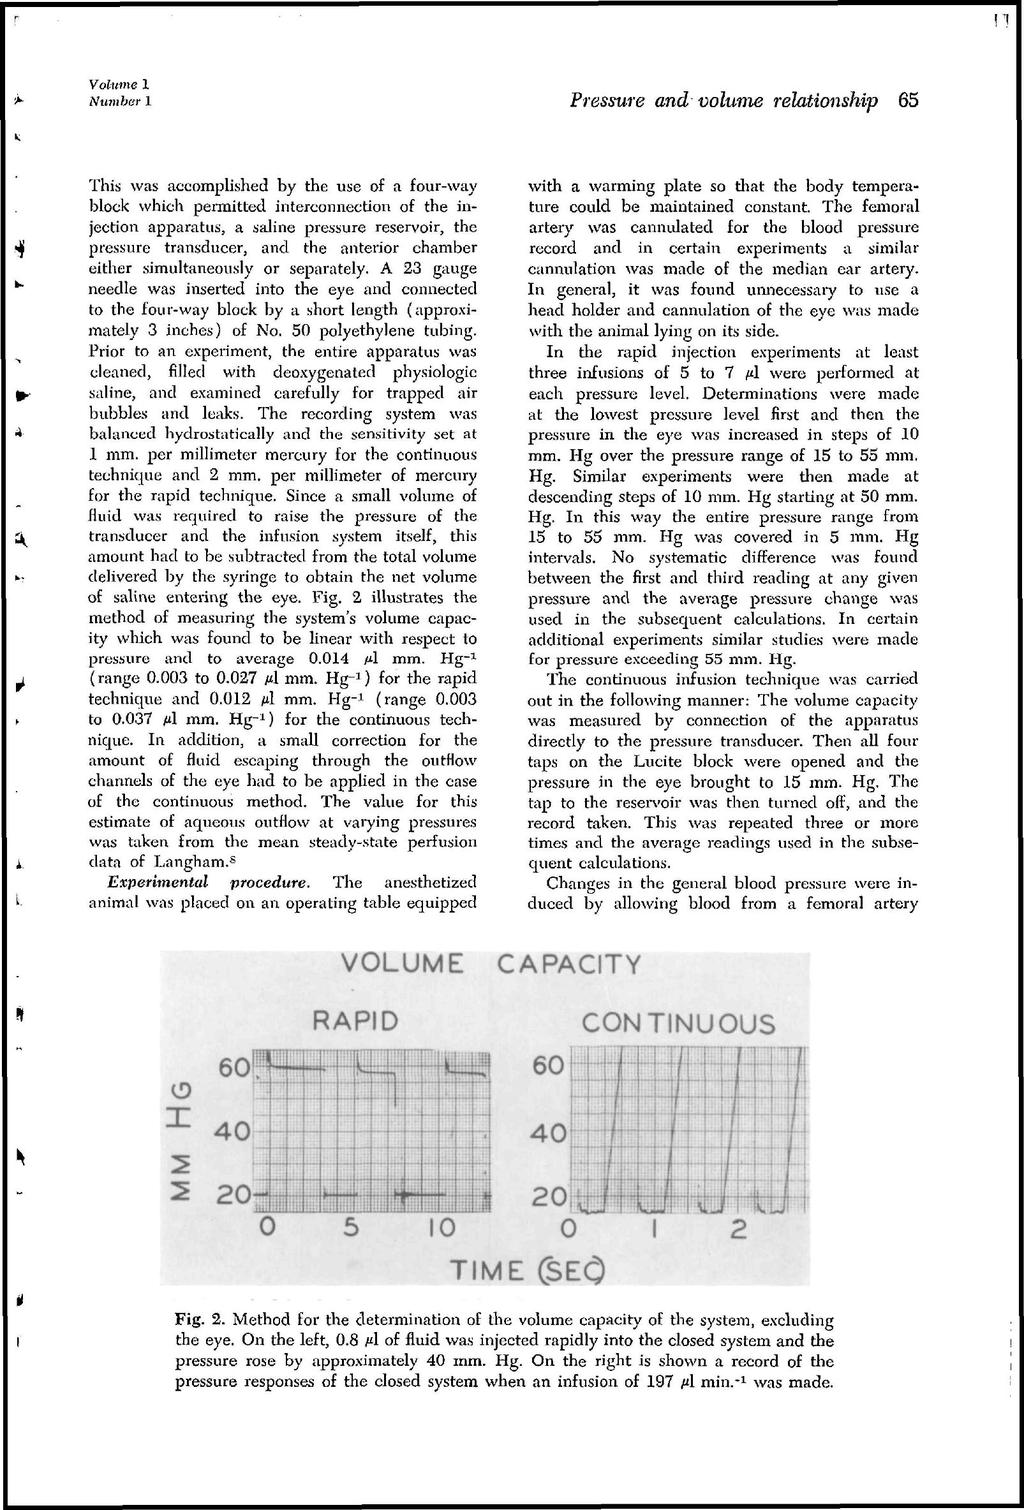 Volume 1 Number 1 Pressure and volume relationship 65 This was accomplished by the use of a fourway block which permitted interconnection of the injection apparatus, a saline pressure reservoir, the